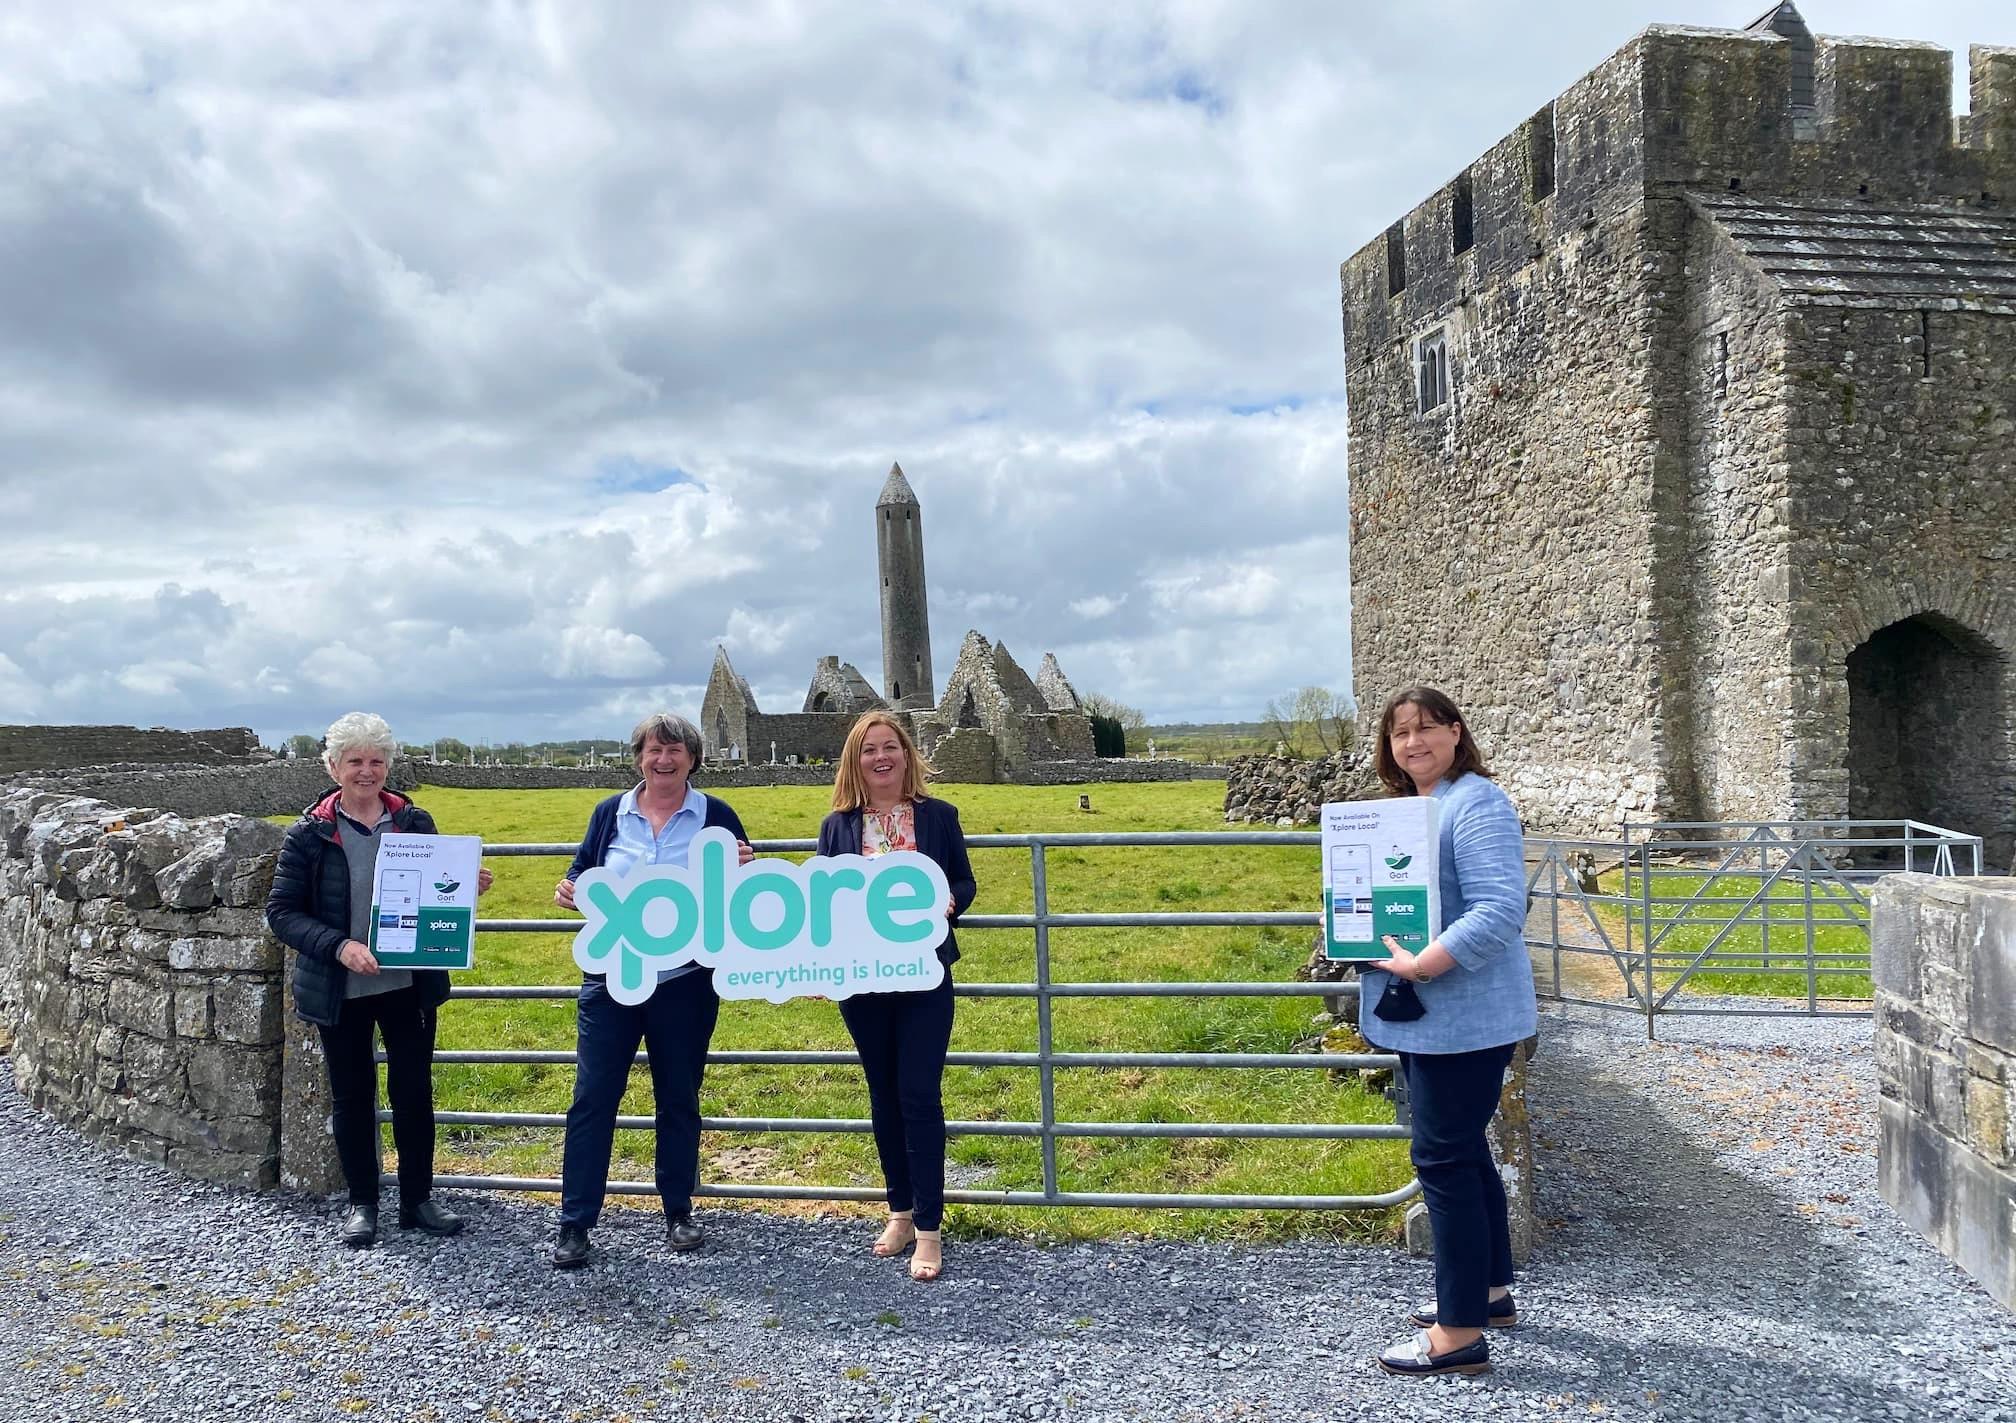 Xplore Gort App & Website Officially Launched at Kilmacduagh Monastery